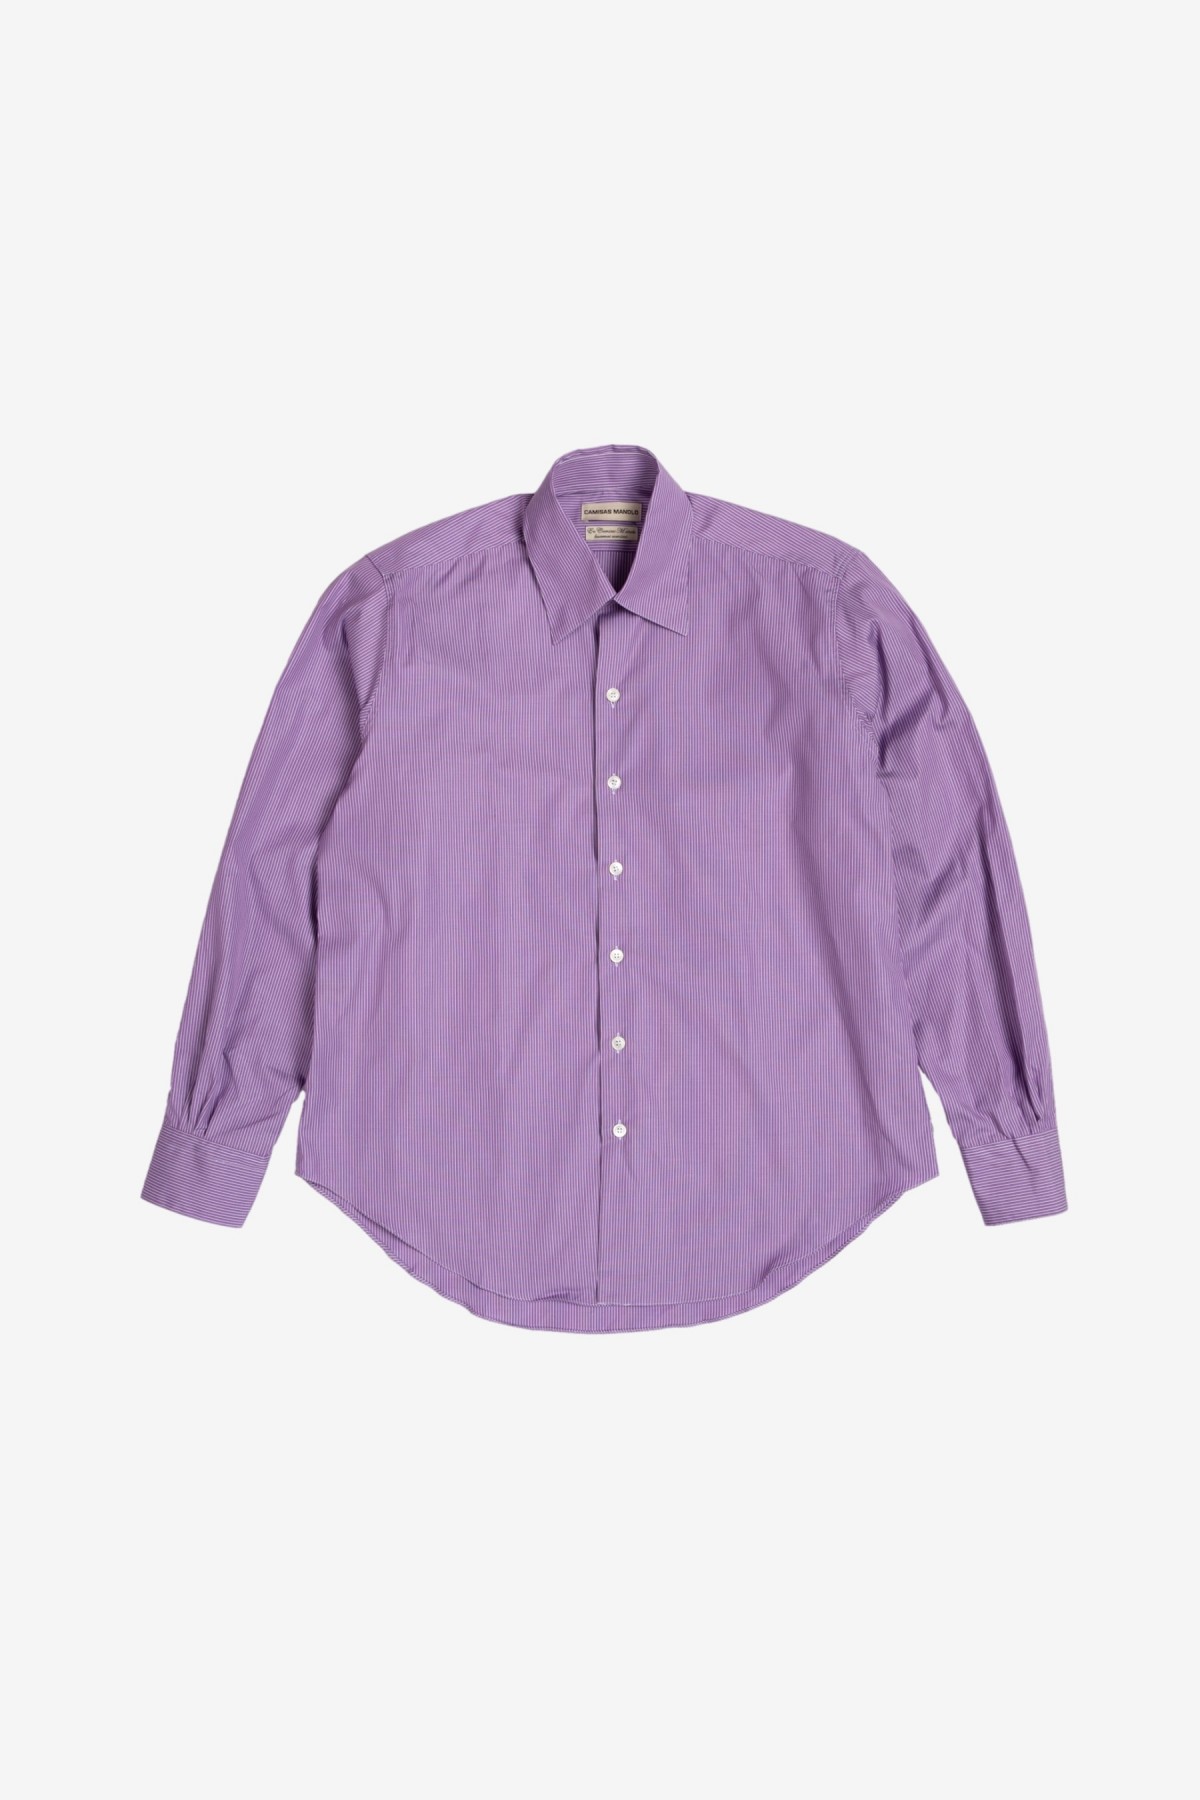 Camisas Manolo Normal Shirt in Purple Stripes